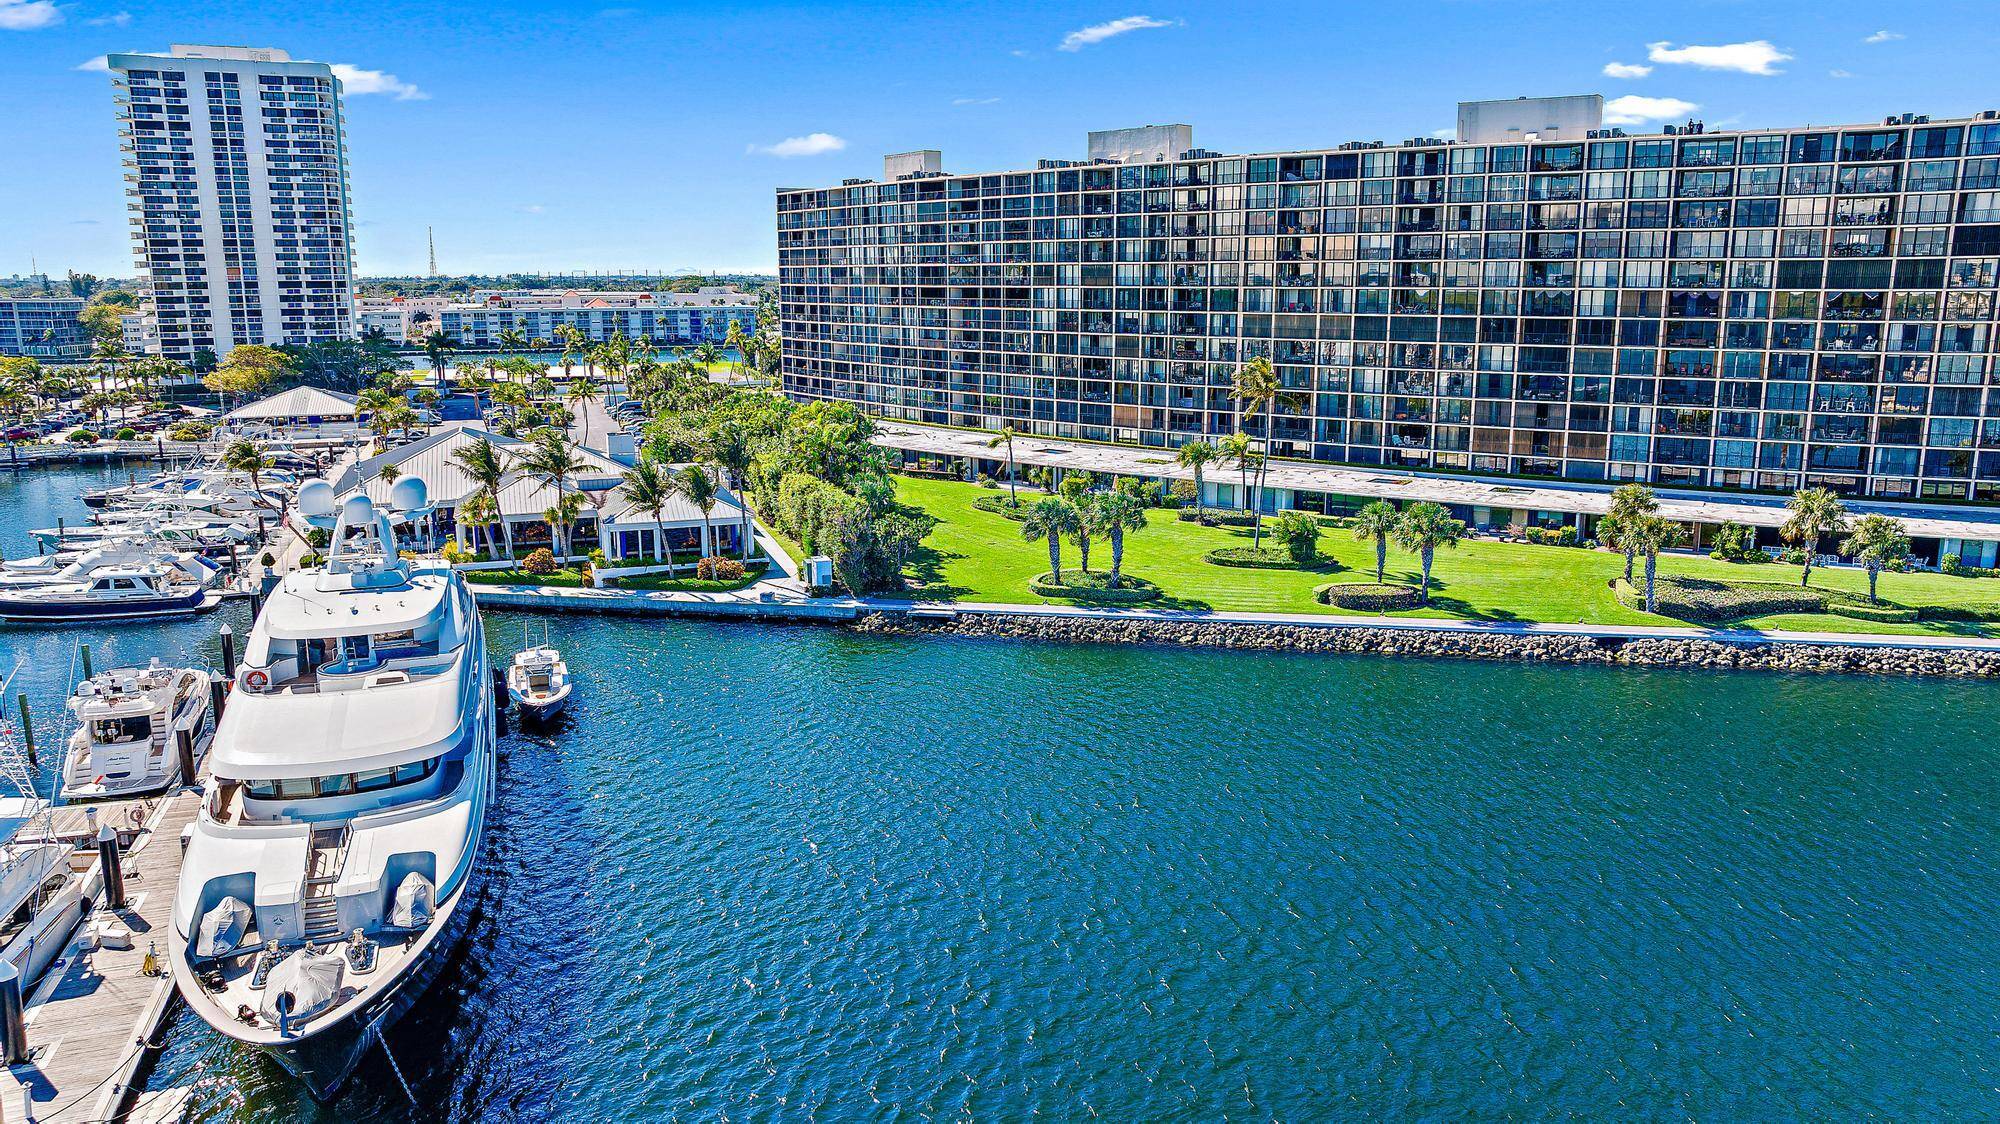 Step inside this completely renovated, waterfront residence w spectacular views of the Old Port Cove marina waterway.